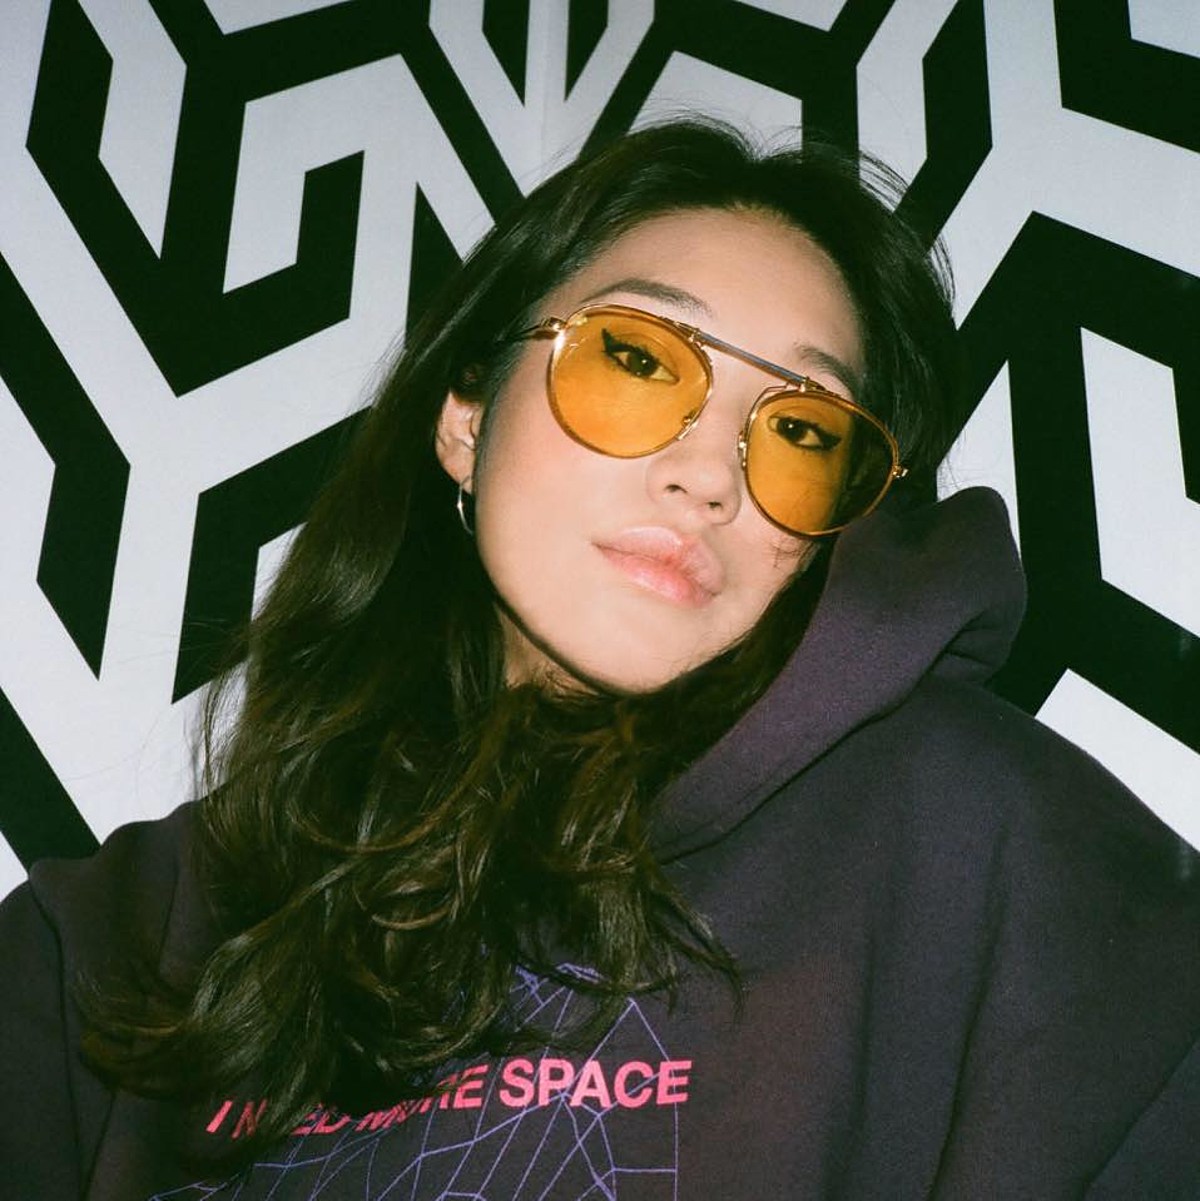 Peggy Gou has a new EP on Ninja Tune, playing Coachella & other US dates